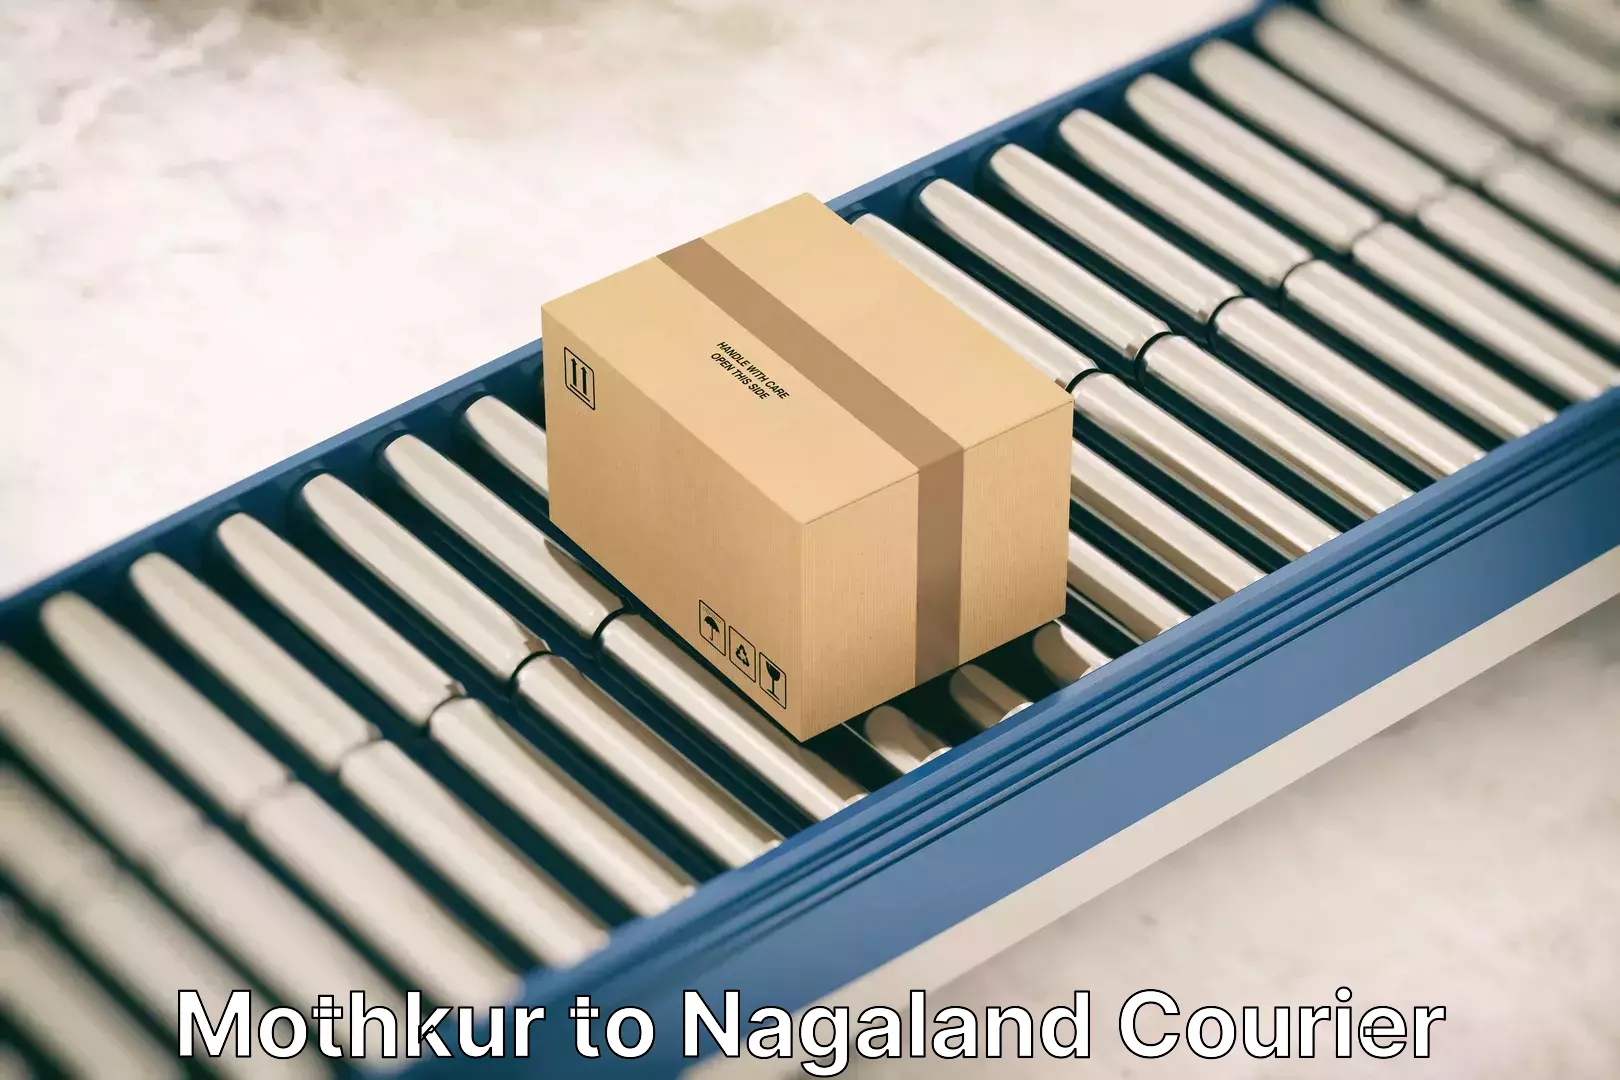 Furniture relocation experts Mothkur to Nagaland